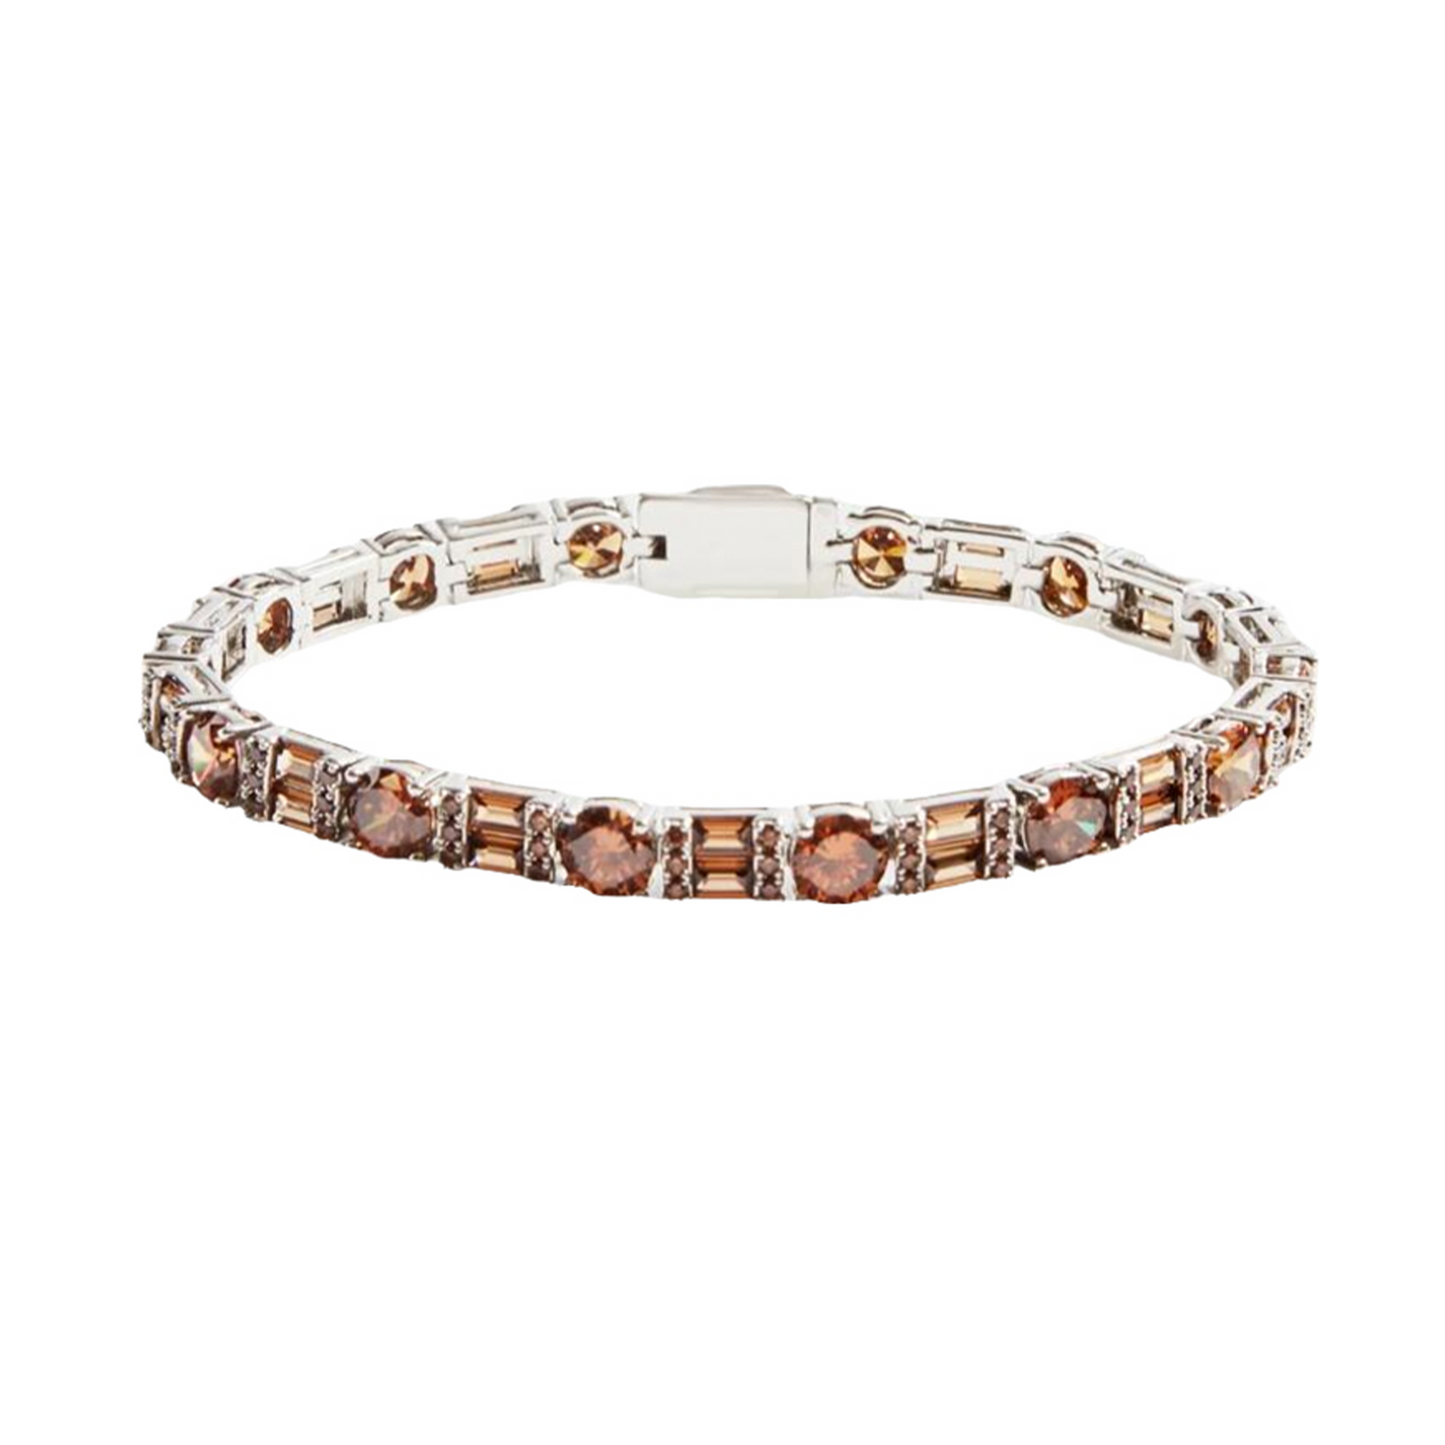 Iced Chocolate Round & Rectangle Mix Tennis Bracelet in White Gold